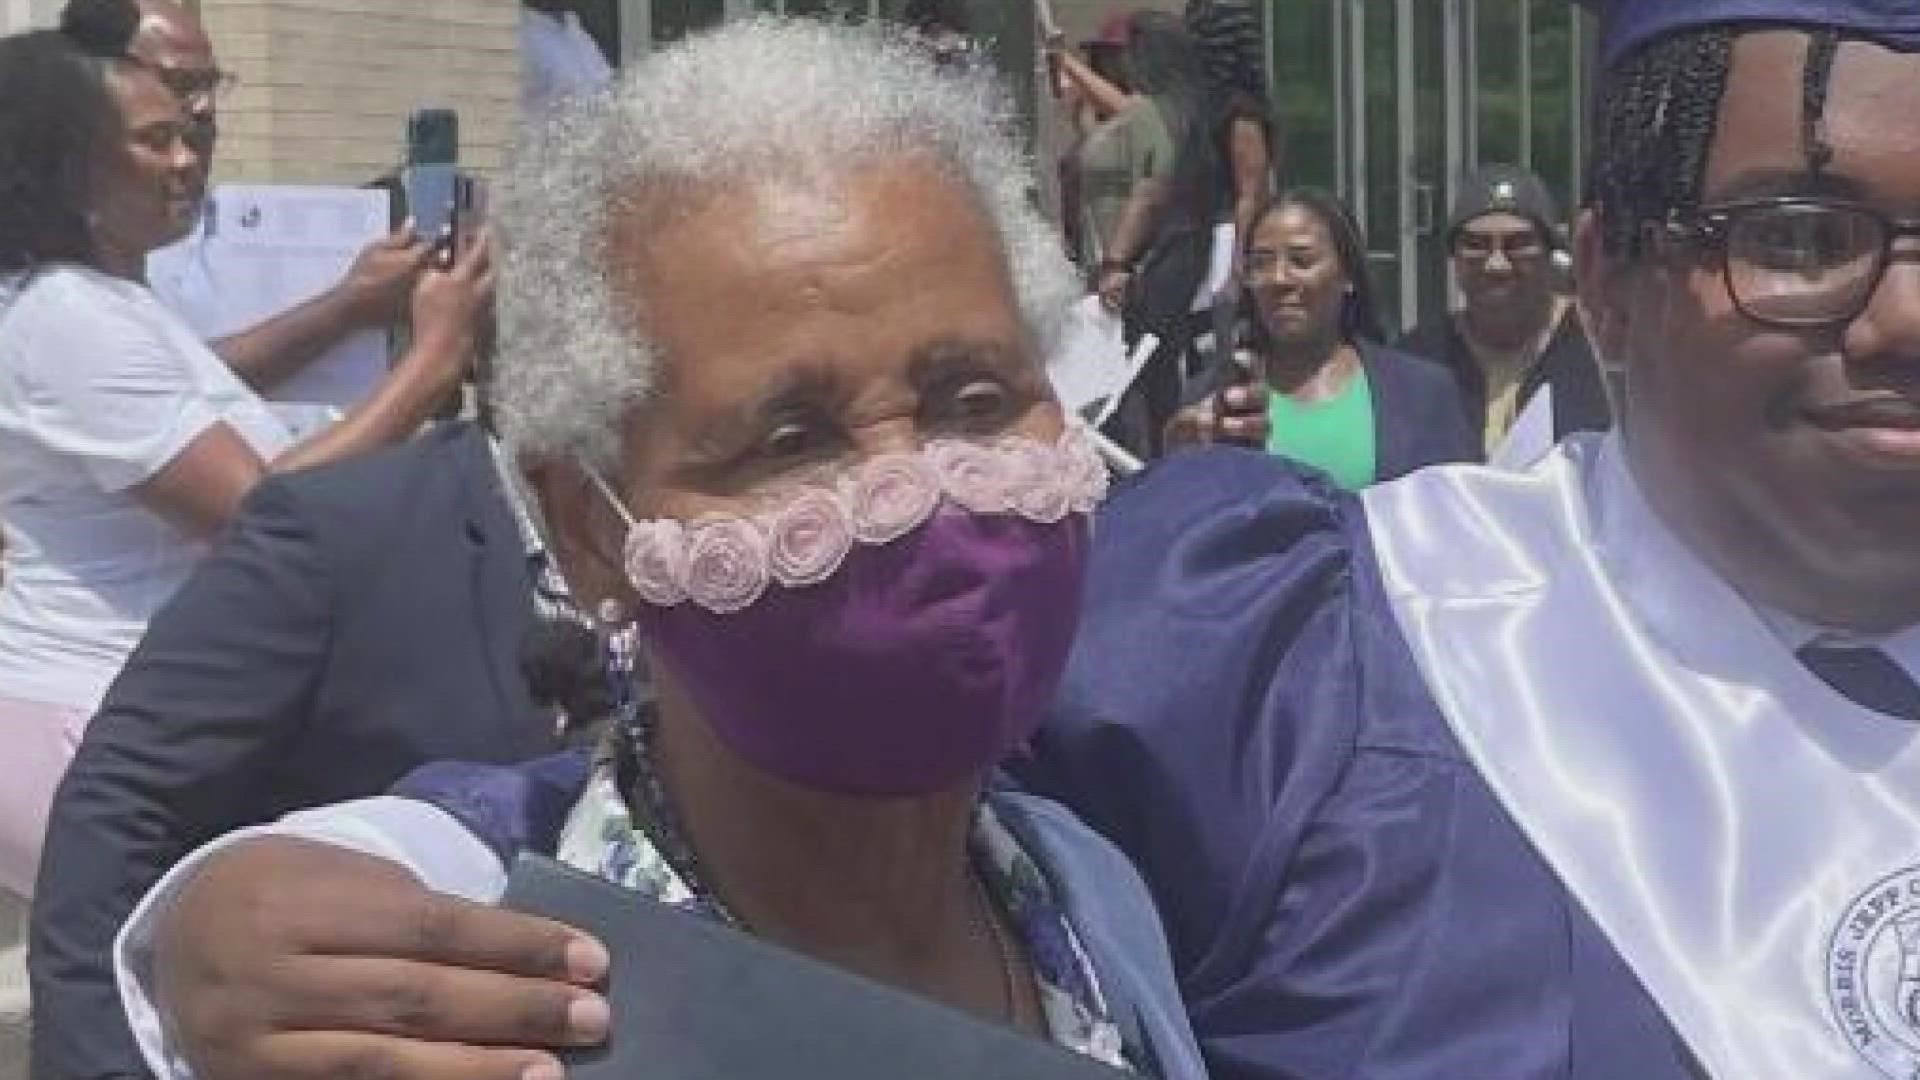 A woman who was attending her grandson's graduation was shot and killed Tuesday. There was a second line in her honor Wednesday.